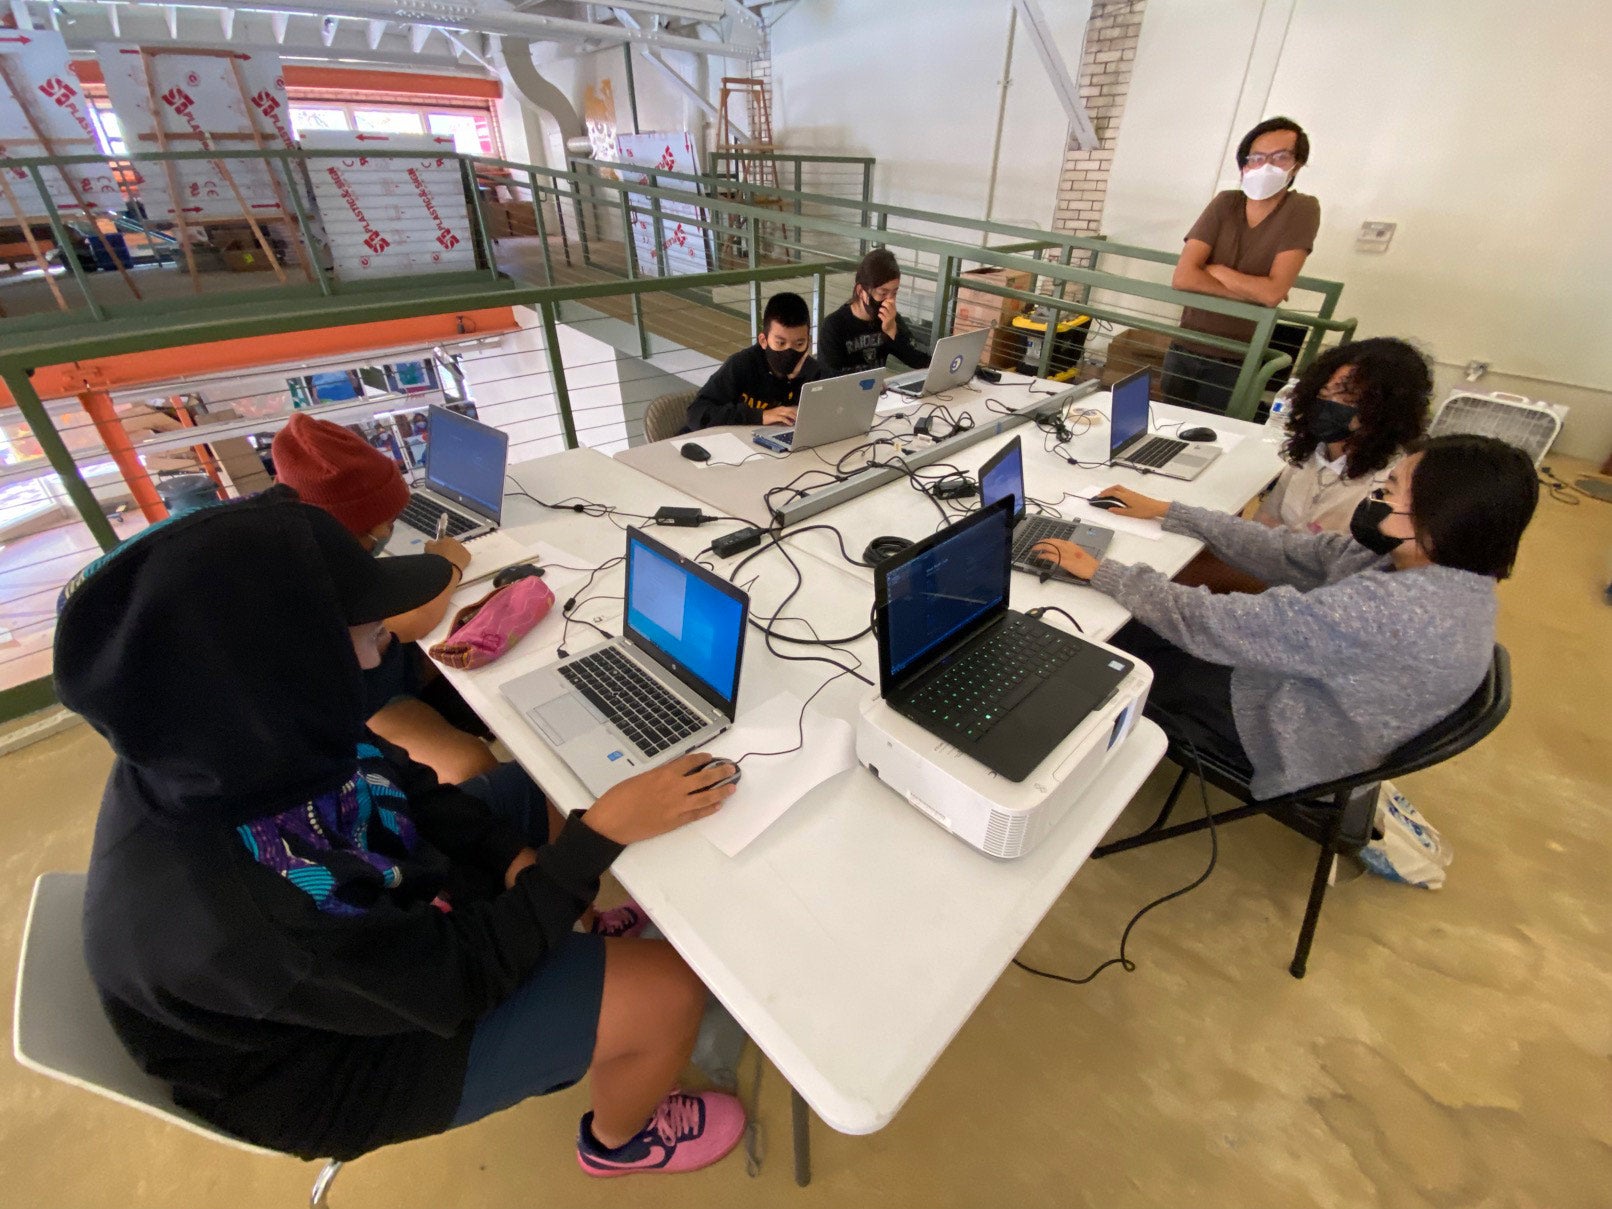 Over 2,500+ local youth have learned about game creation and programming at The MADE since 2011. (Photo: The MADE)